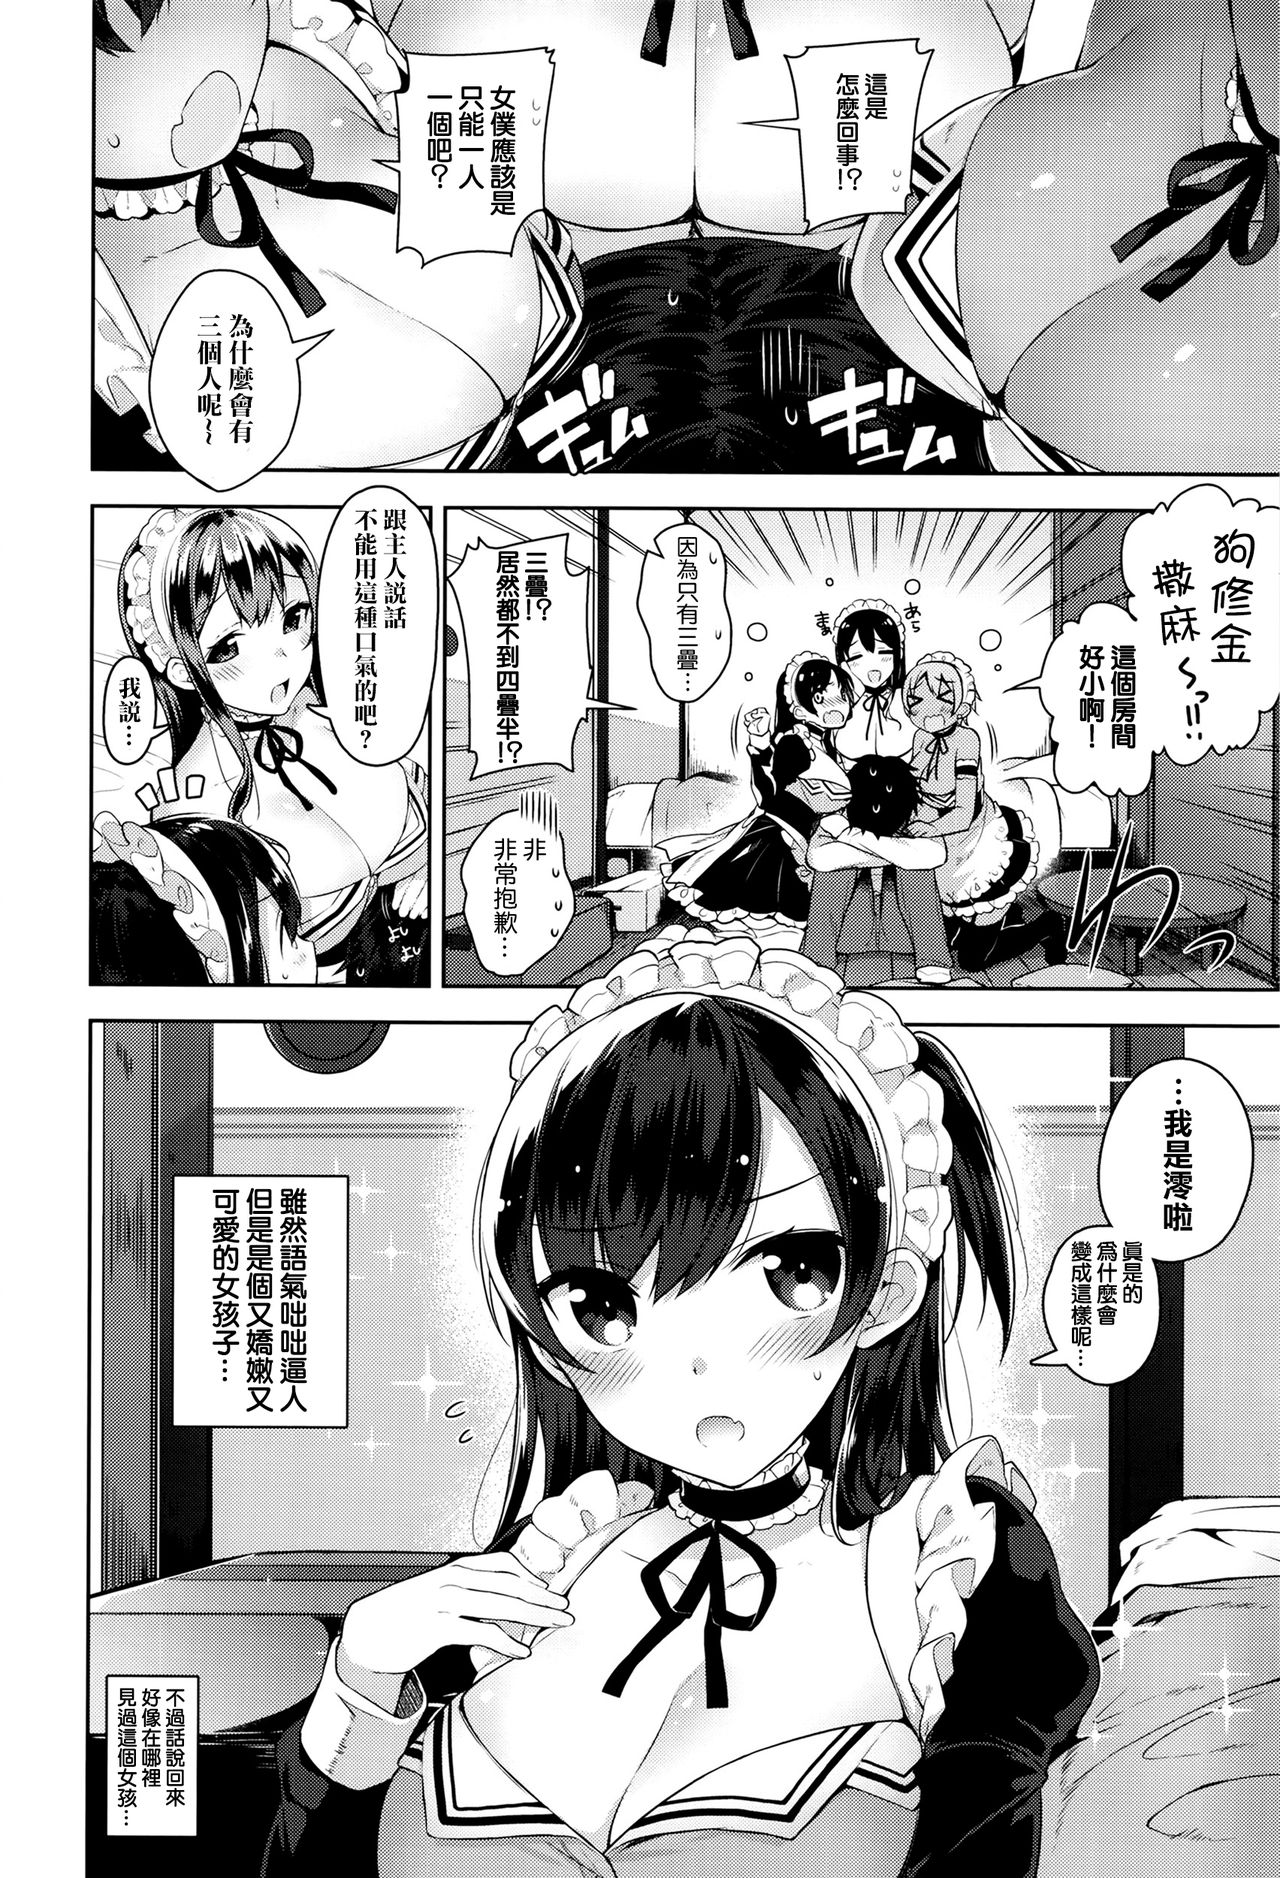 [Neet] Erie Dere - Please choose me, my master. (COMIC ExE 01) [Chinese] [无毒汉化组] [にぃと] エリエデレ (コミック エグゼ 01) [中国翻訳]